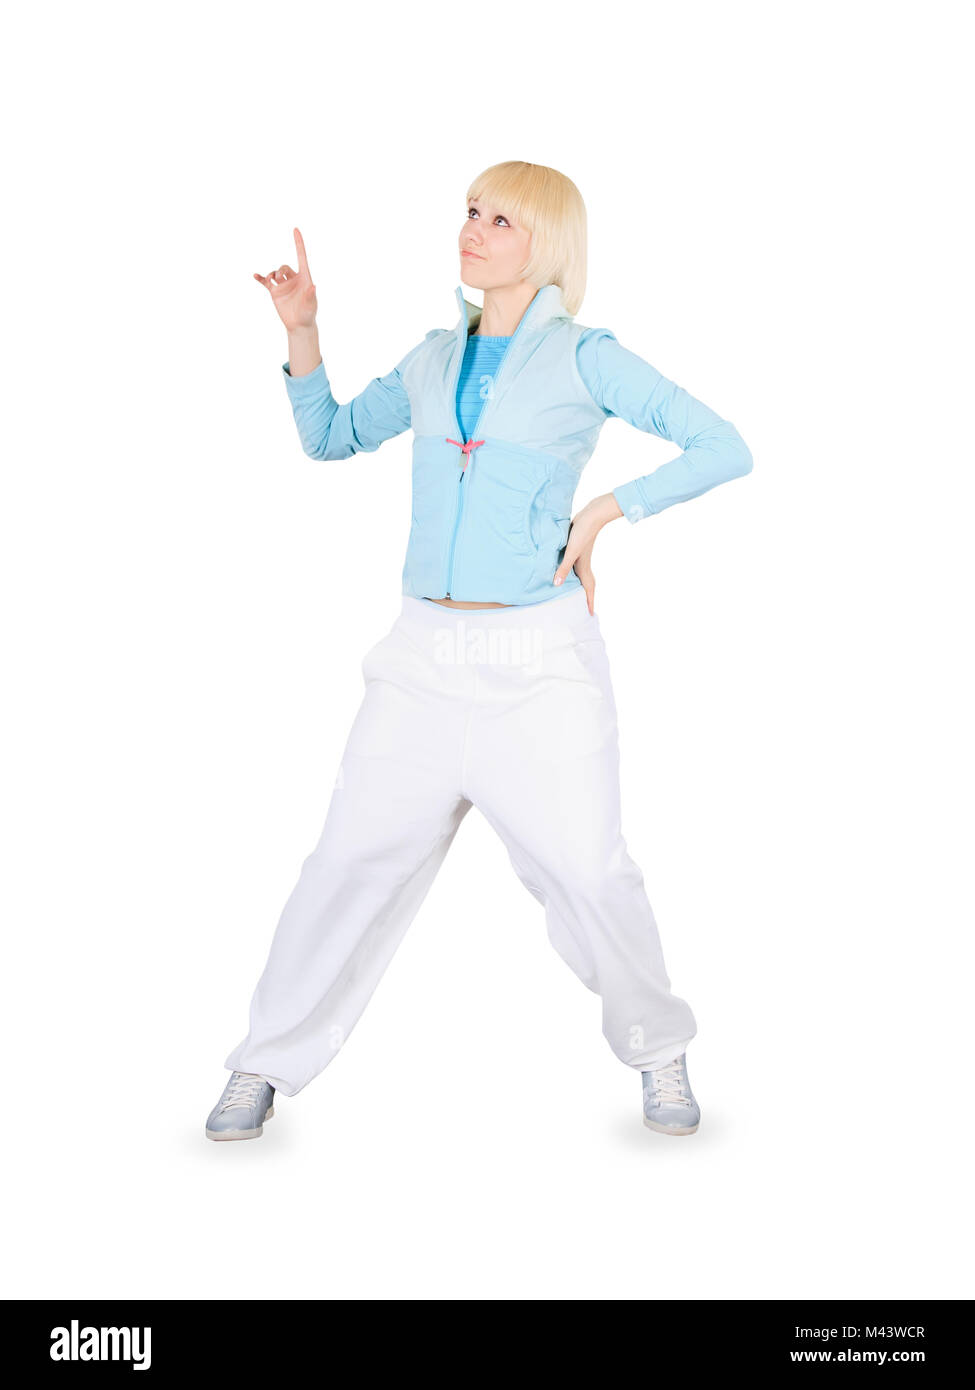 Teenager dancing breakdance in action over white Stock Photo